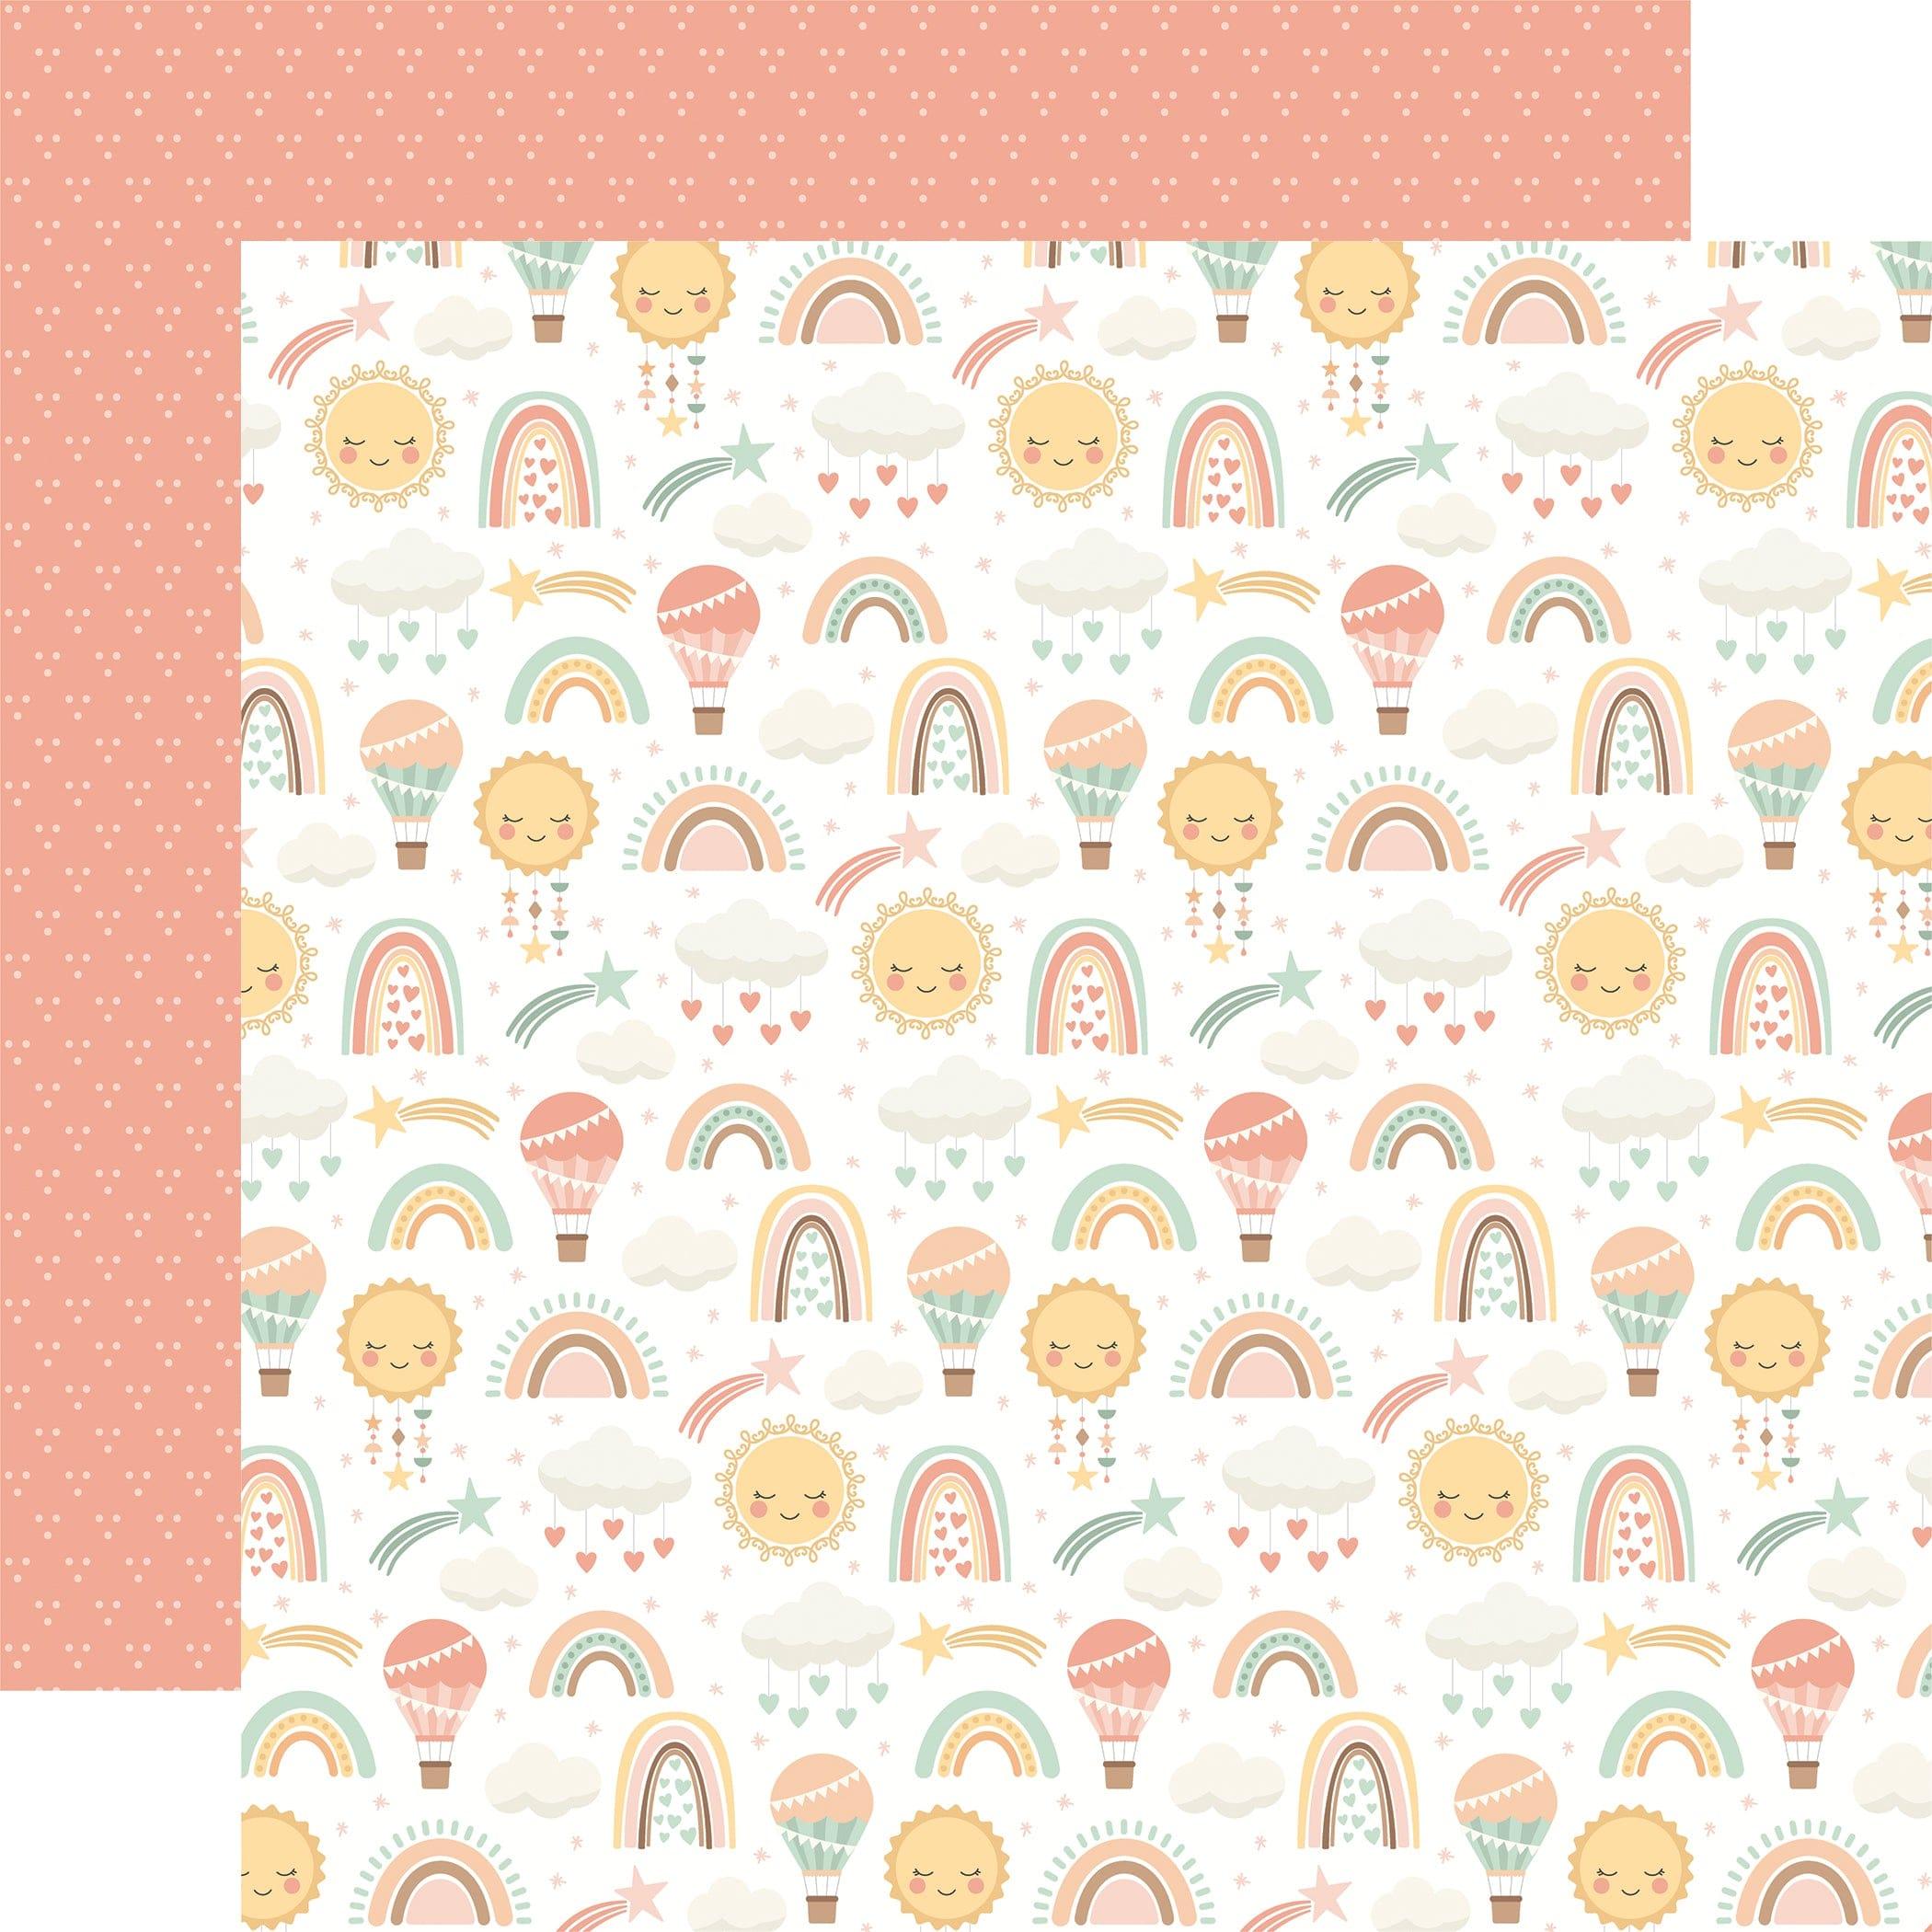 Our Baby Girl Collection Darling And Dreamy 12 x 12 Double-Sided Scrapbook Paper by Echo Park Paper - Scrapbook Supply Companies